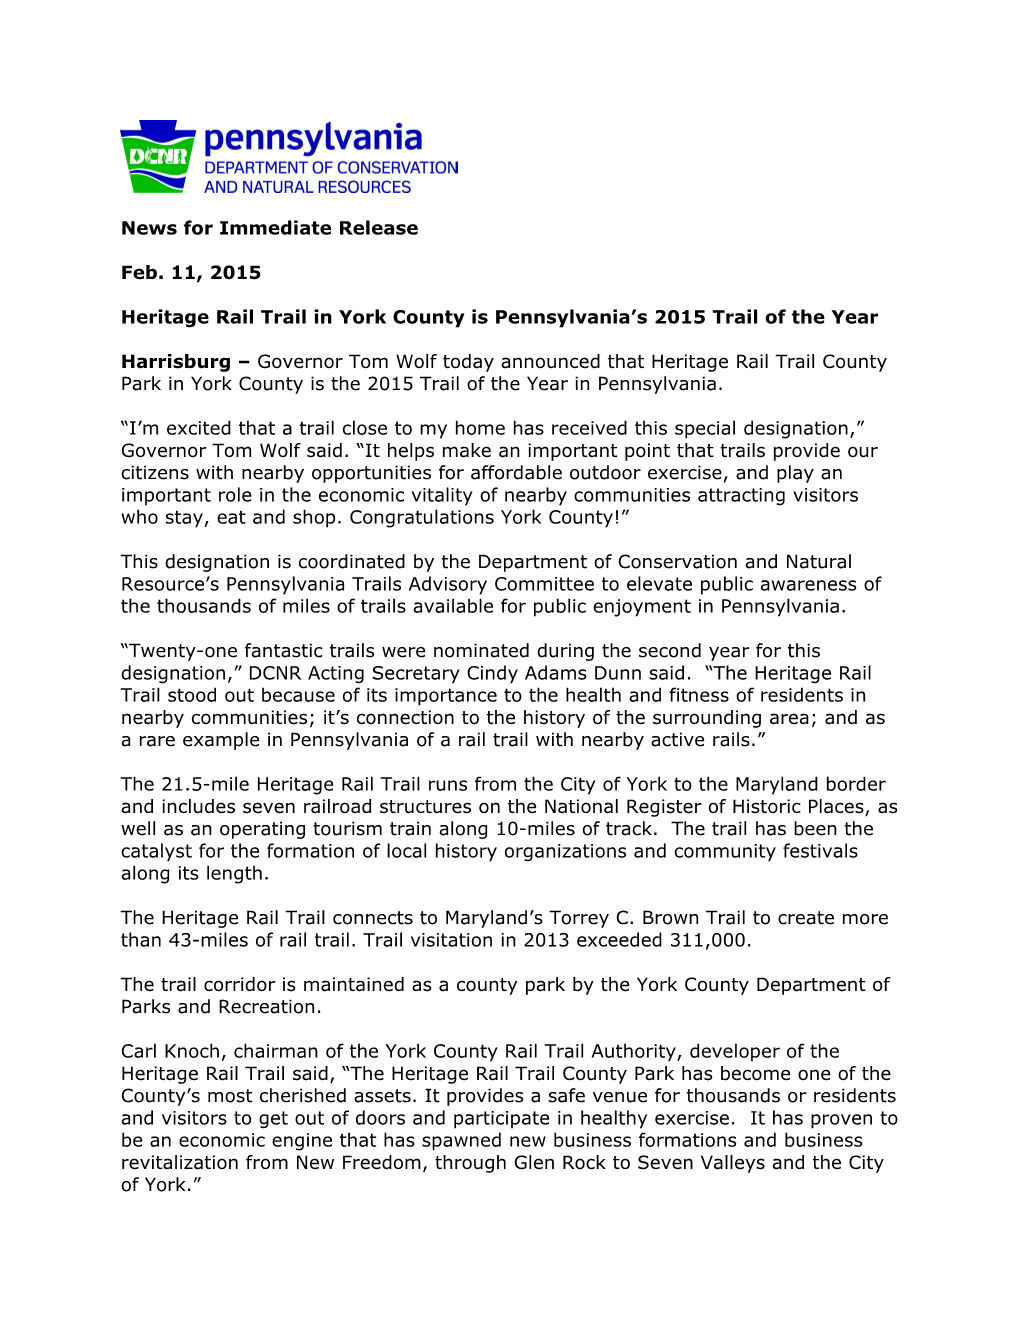 Heritage Rail Trail in York County Is Pennsylvania S 2015 Trail of the Year